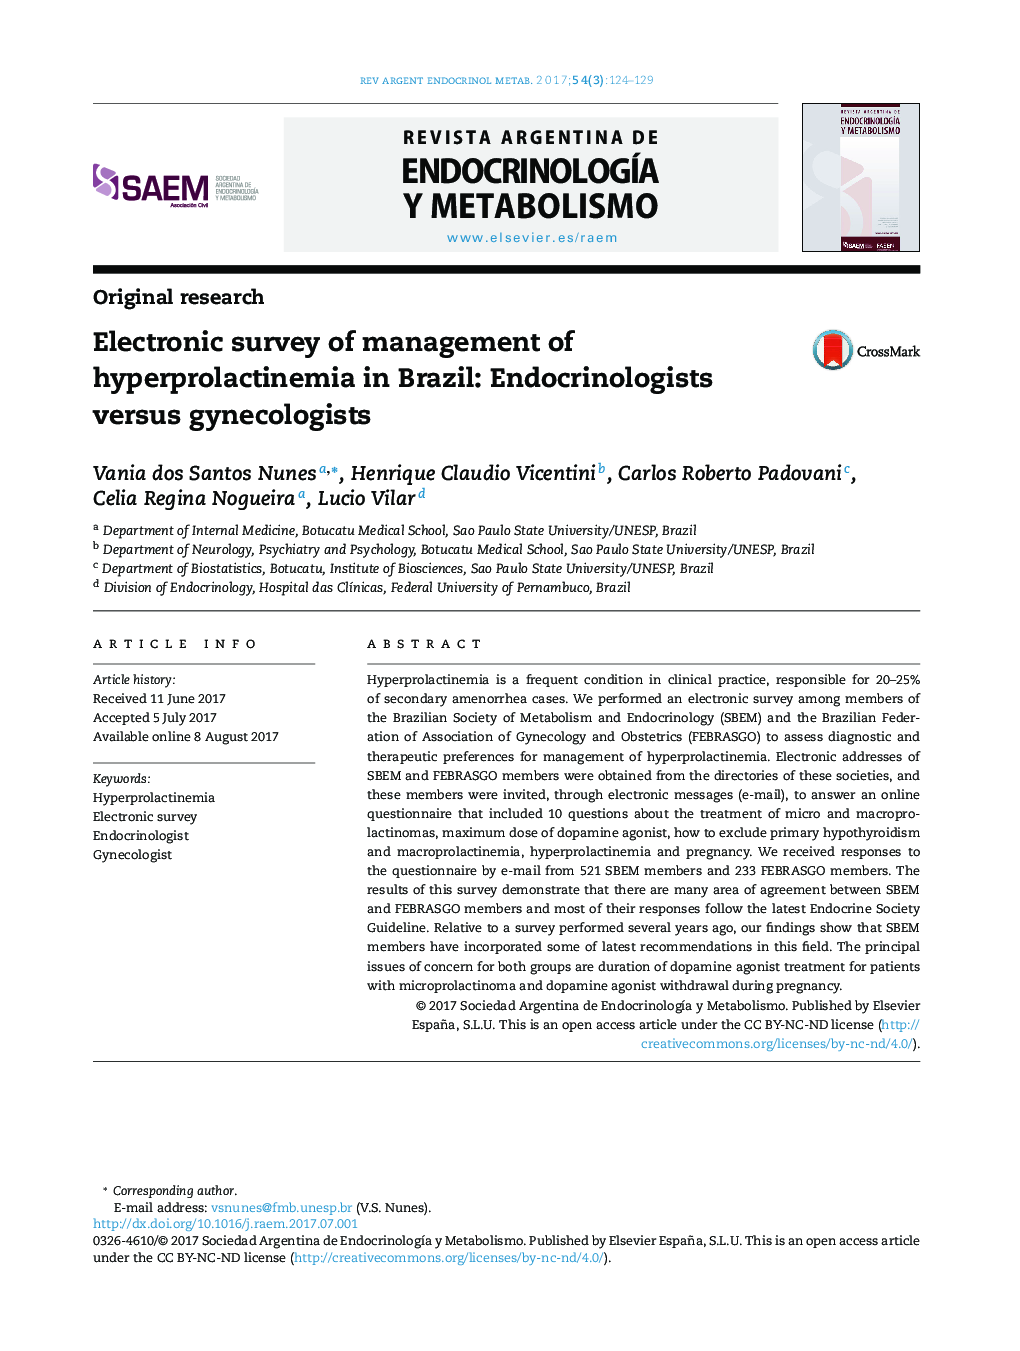 Electronic survey of management of hyperprolactinemia in Brazil: Endocrinologists versus gynecologists